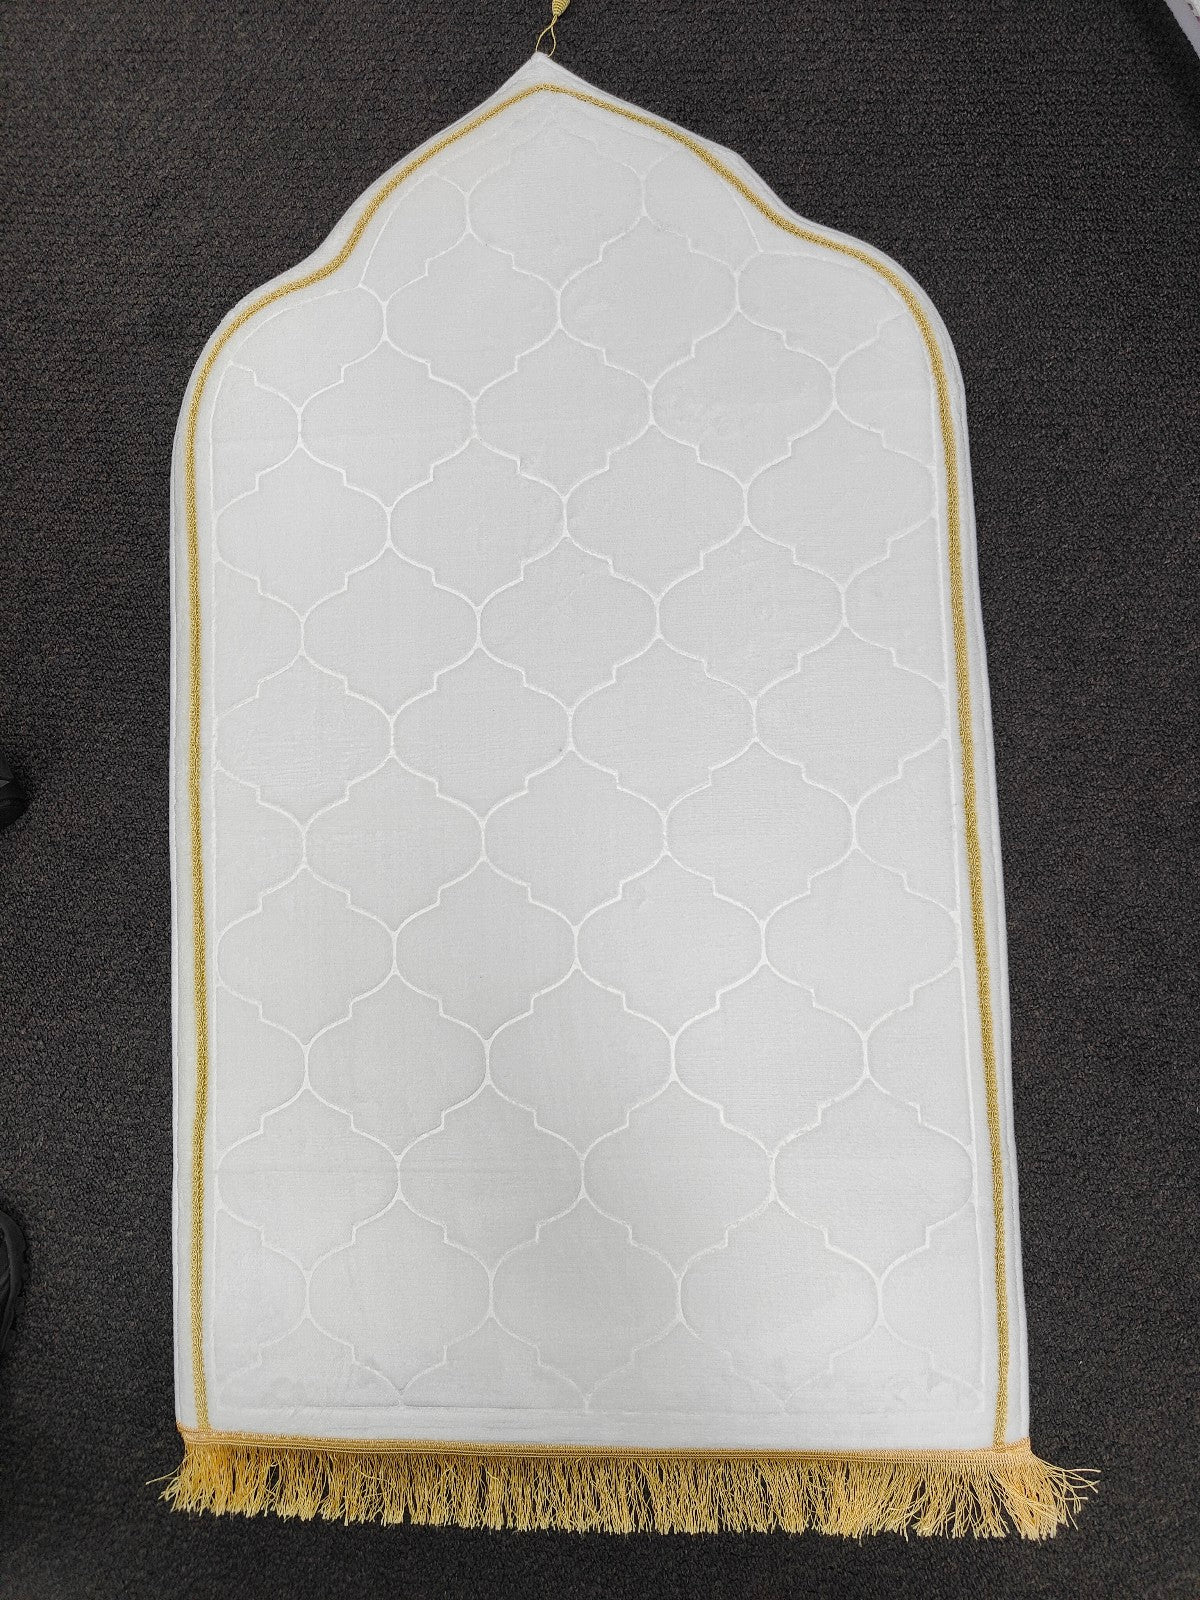 Experience divine comfort with our Premium Padded Prayer Mat in White, exclusively available at Hikmah Boutique. Crafted to enhance your prayer experience, this soft and comfortable Islamic Prayer Mat ensures your moments of devotion are serene and tranquil. Perfect for adults seeking a luxurious and cushioned prayer rug.